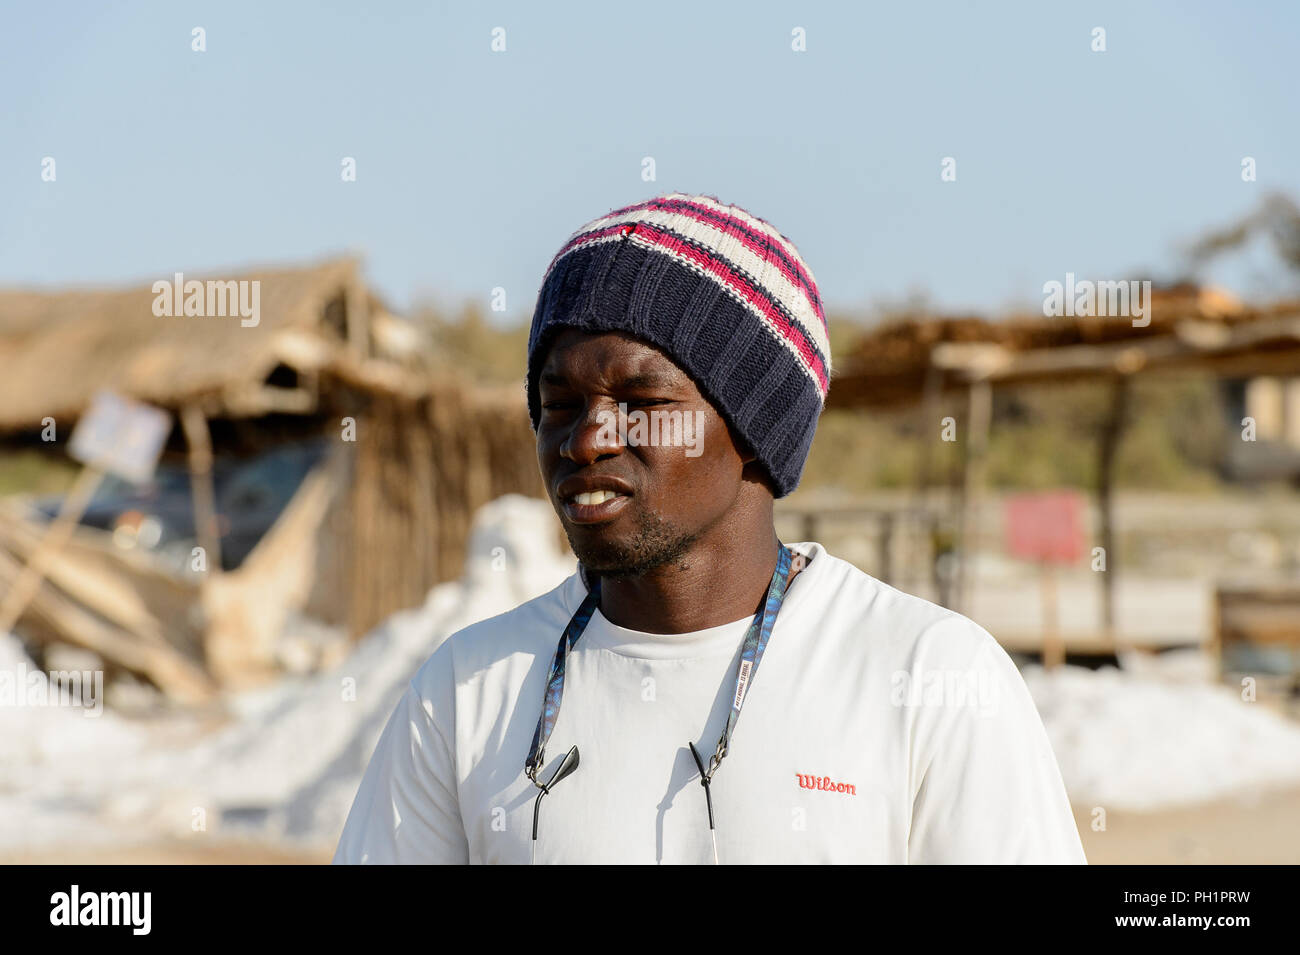 LAC ROSE, SENEGAL - APR 26, 2017: Unidentified Senegalese man in a hat and white shirt frowns on the salty coast of the Lake Retba, UNESCO World Herit Stock Photo